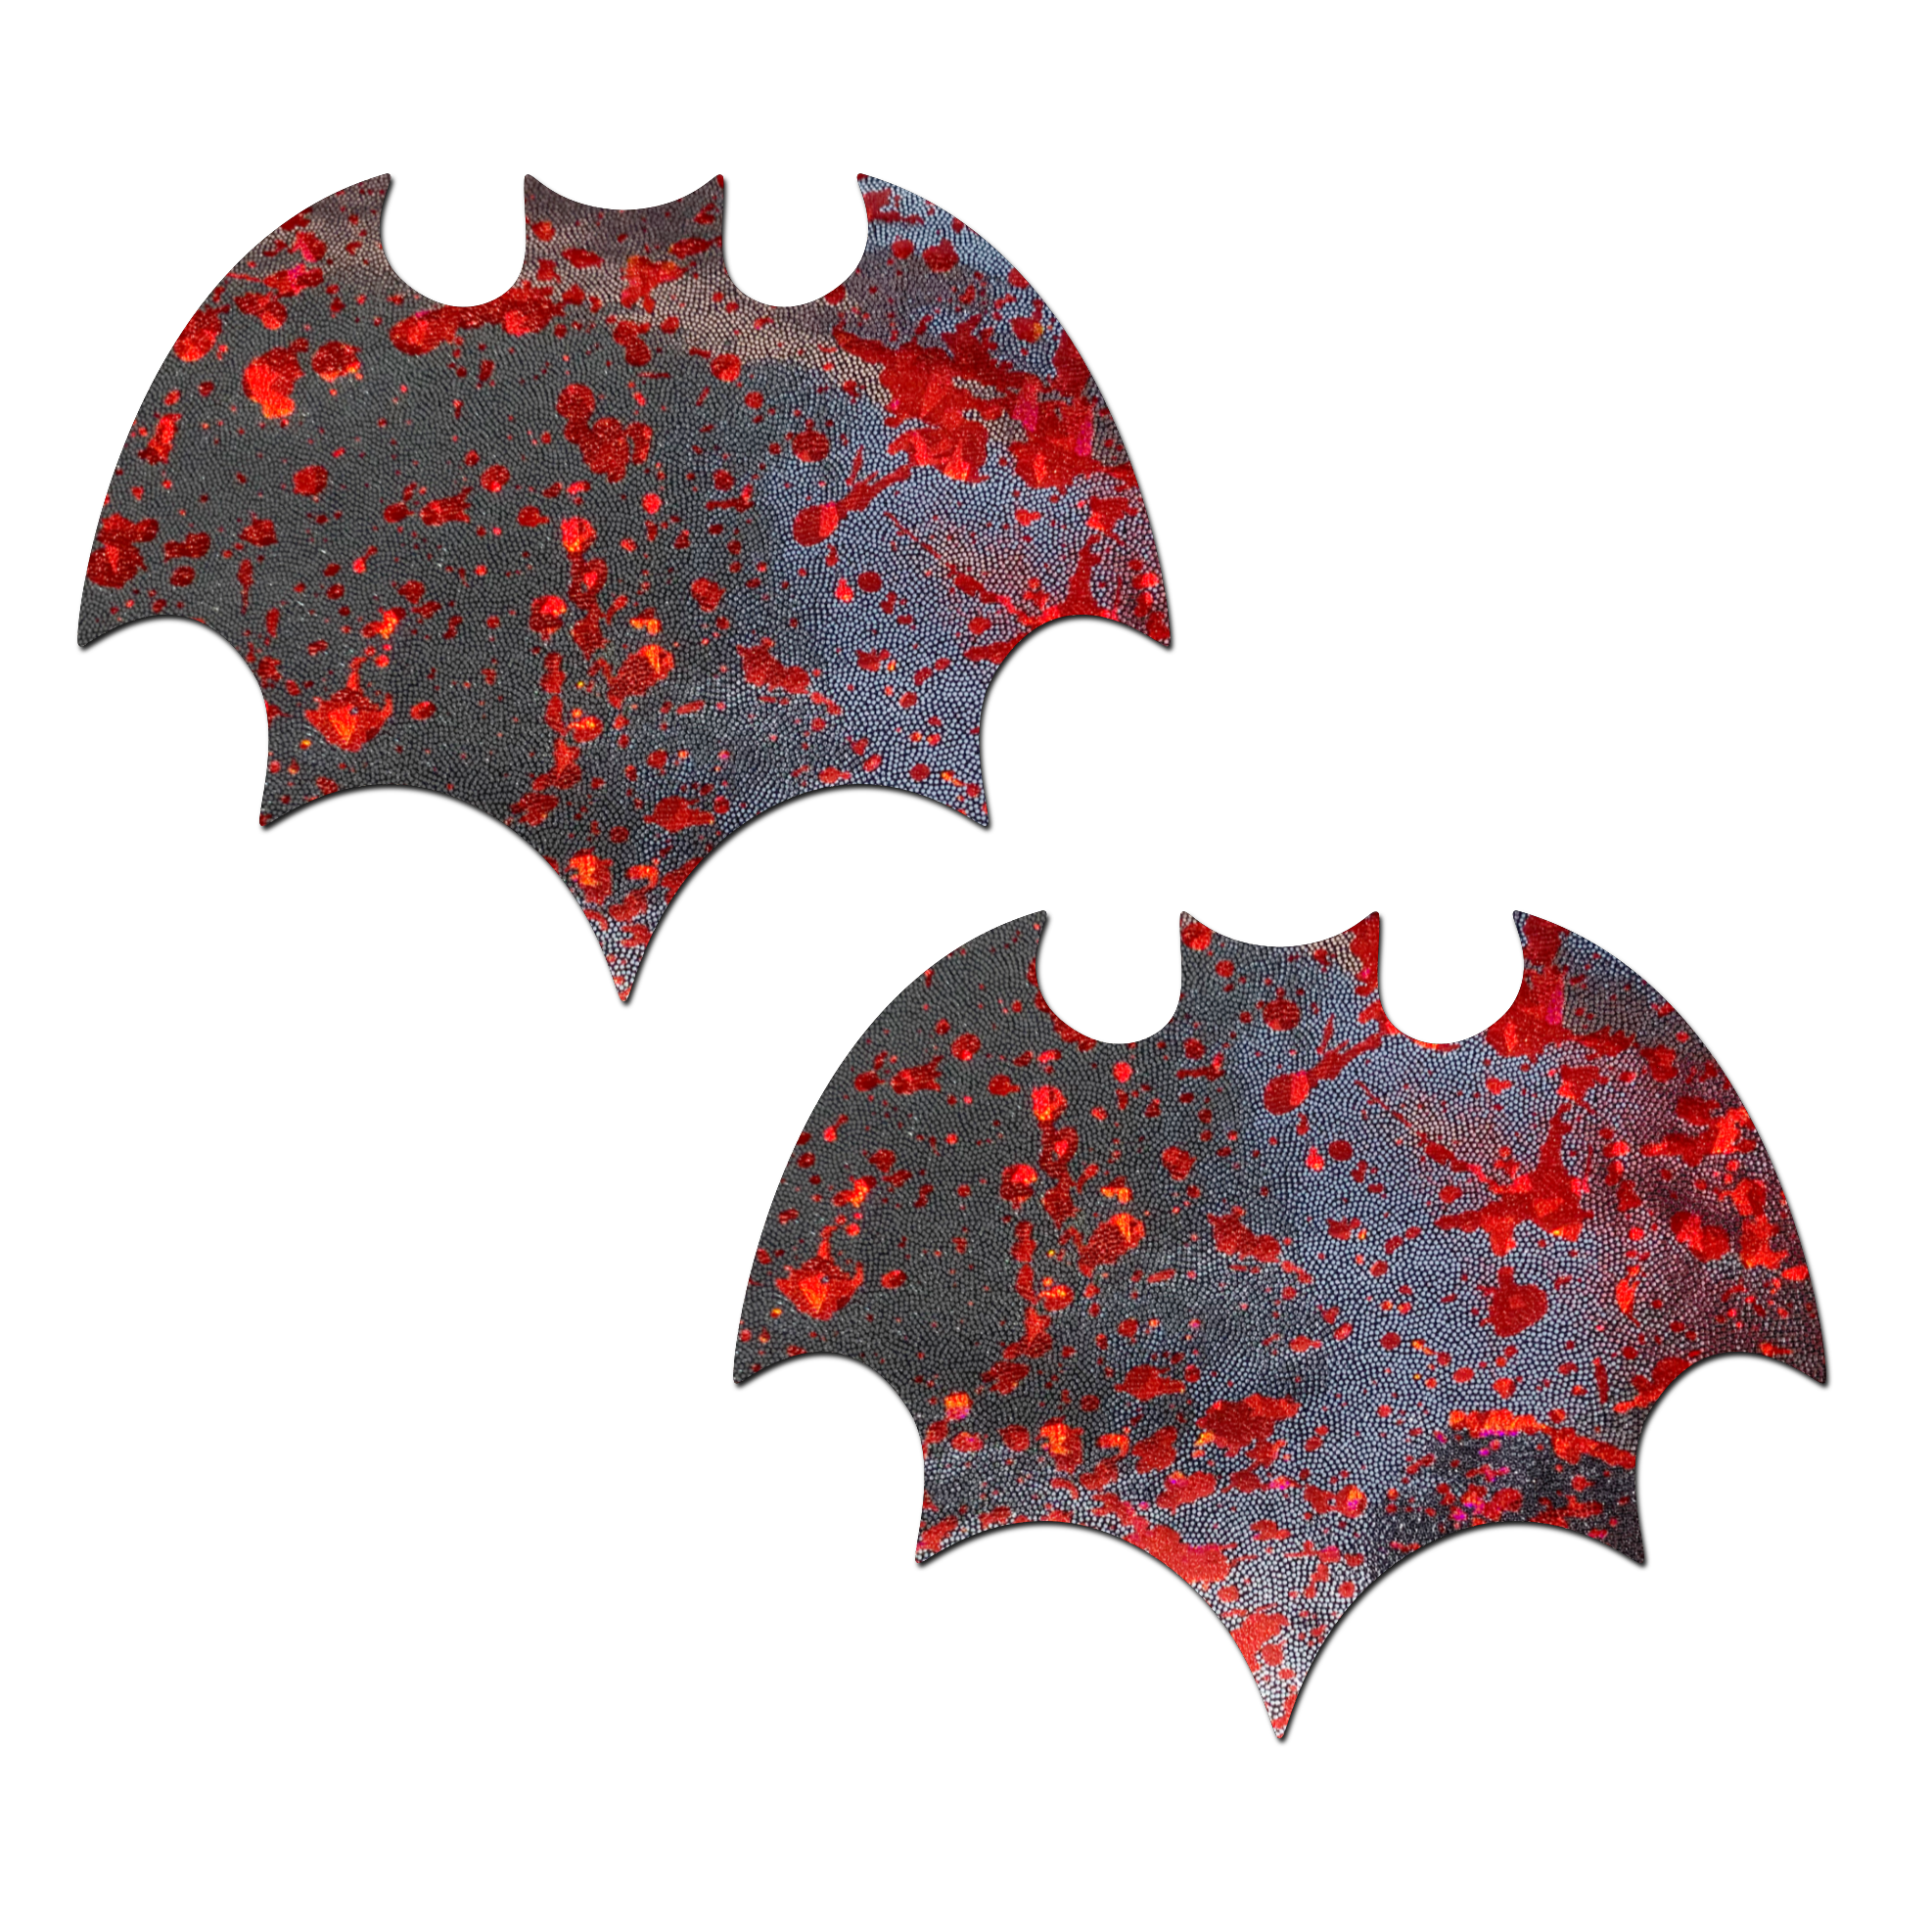 5-Pack: Vamp: Splatter Holographic Glitter Silver & Red Bat Nipple Pasties by Pastease®